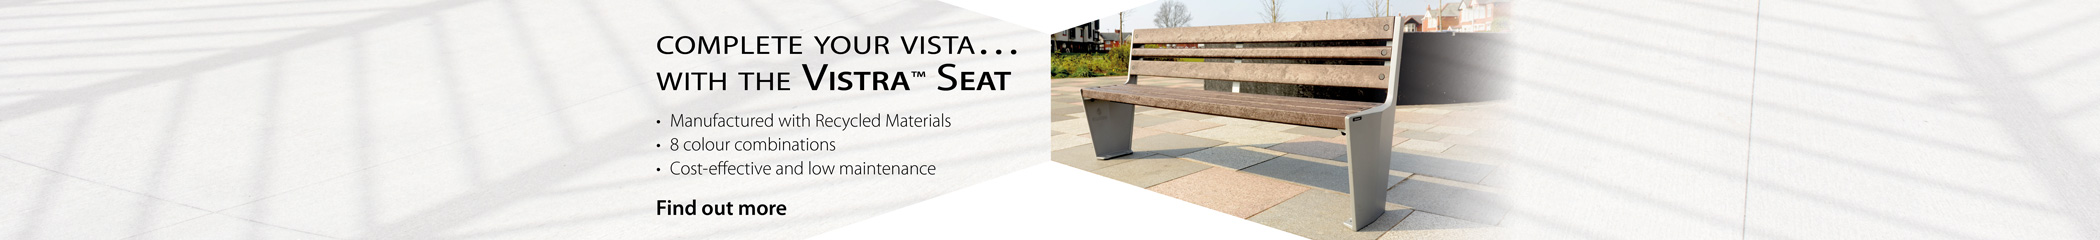 Commercial Outdoor Seating and Street Furniture Benches - Glasdon ...